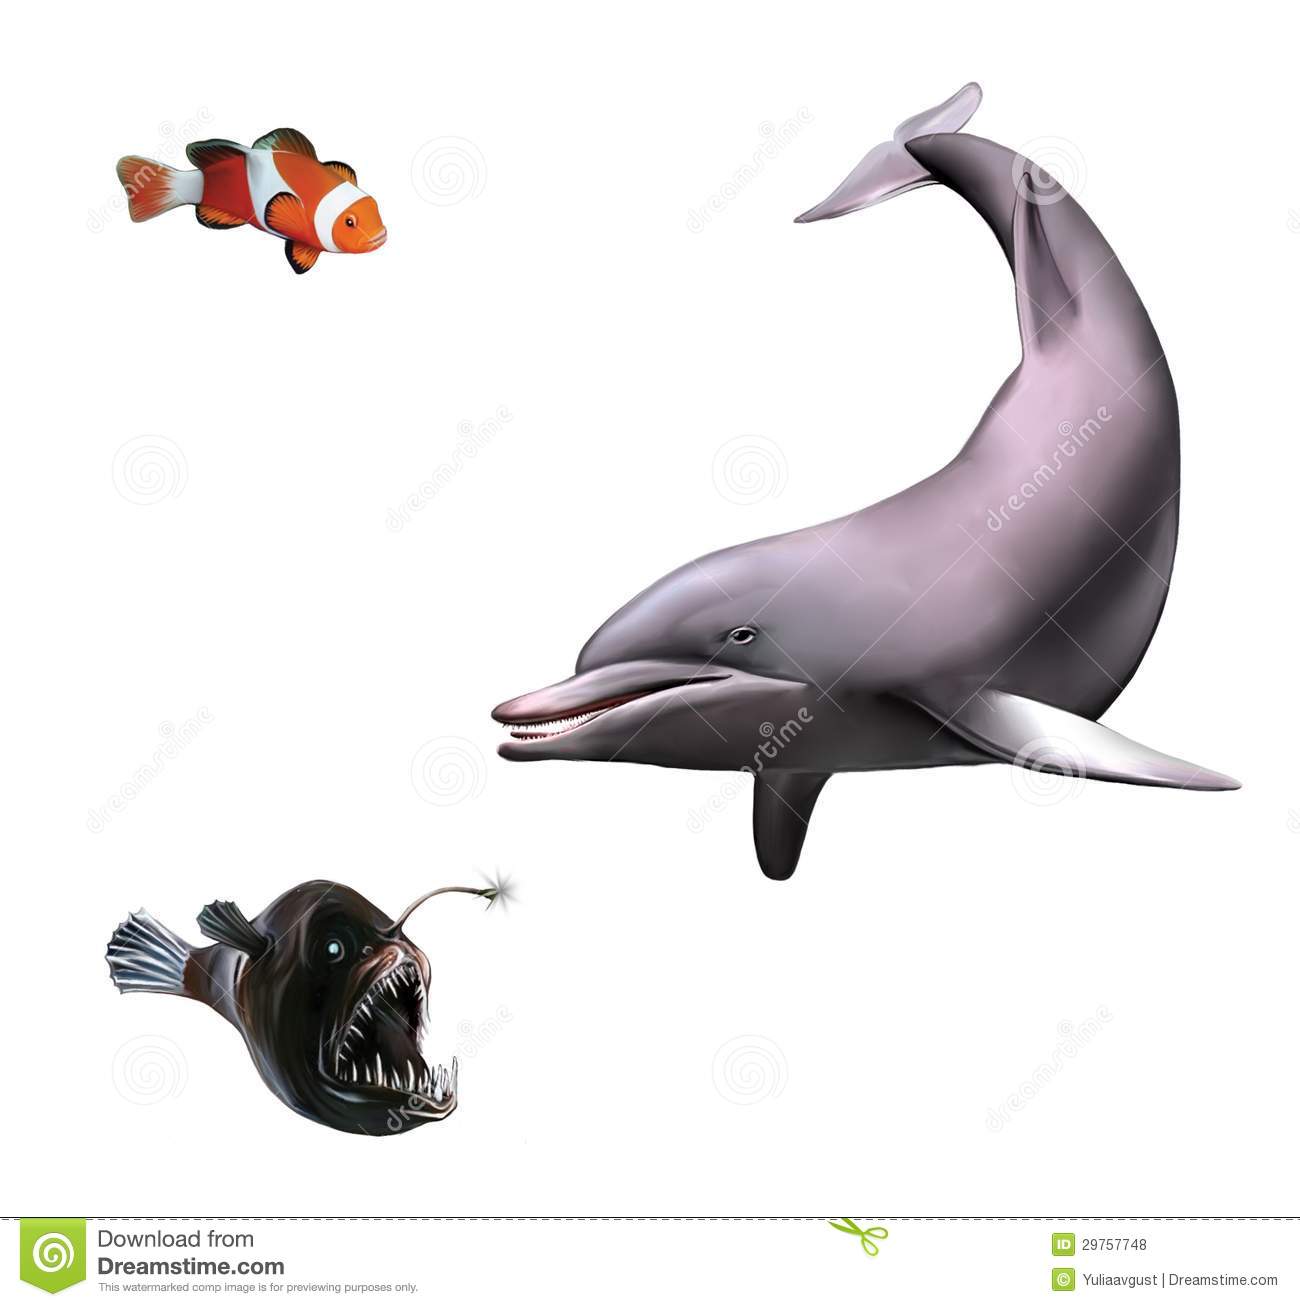 Young Dolphin. Monk Fish And Clown Fish Royalty Free Stock Photos.